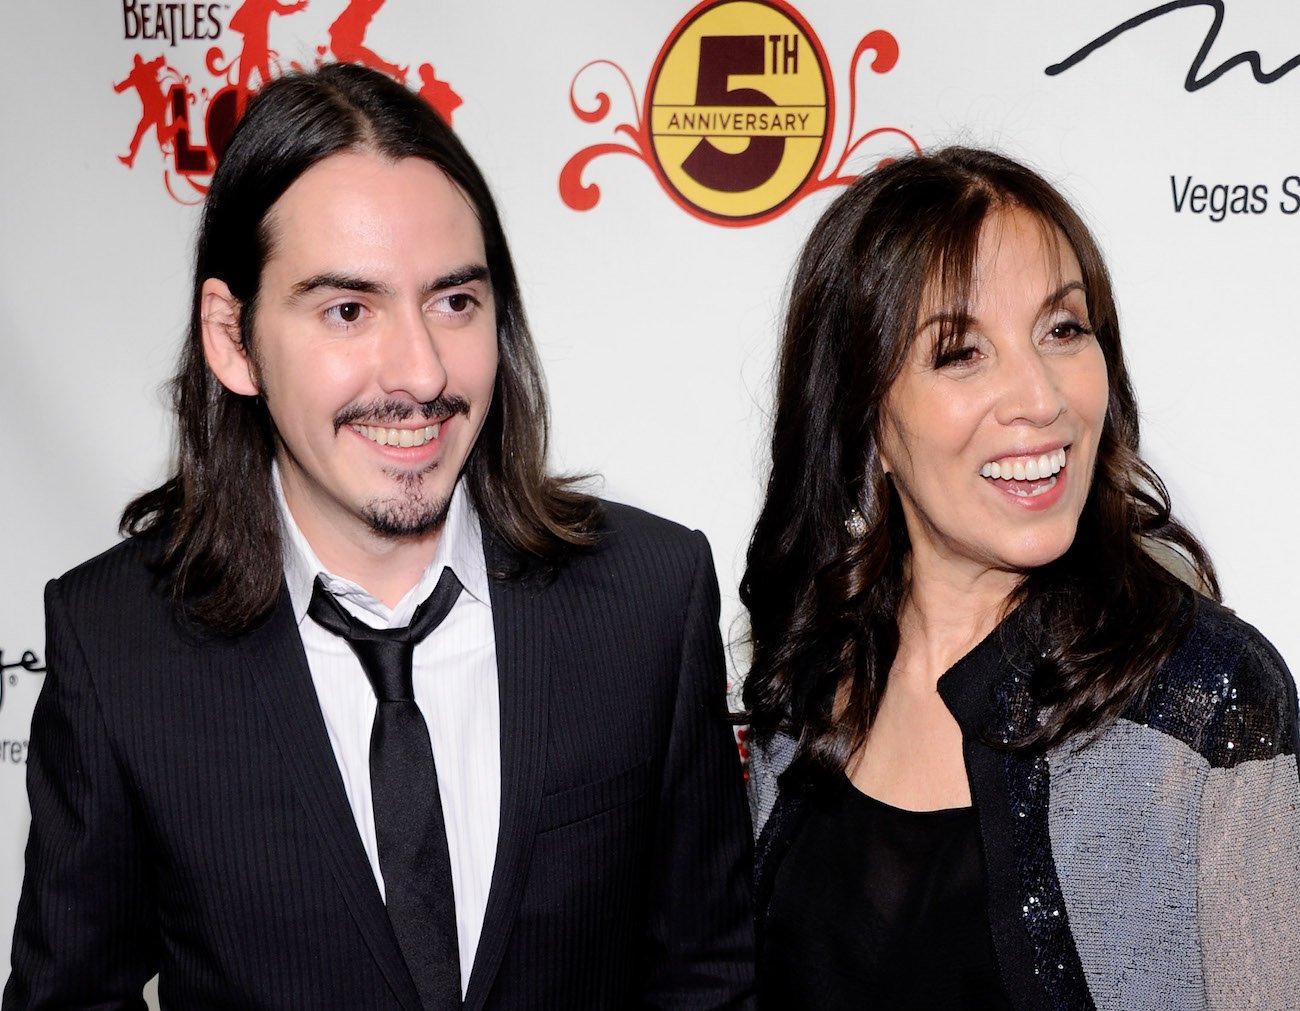 George Harrison's wife, Olivia, with their son, Dhani, at the celebration of the fifth anniversary of 'The Beatles LOVE BY Cirque du Soleil' in 2011.